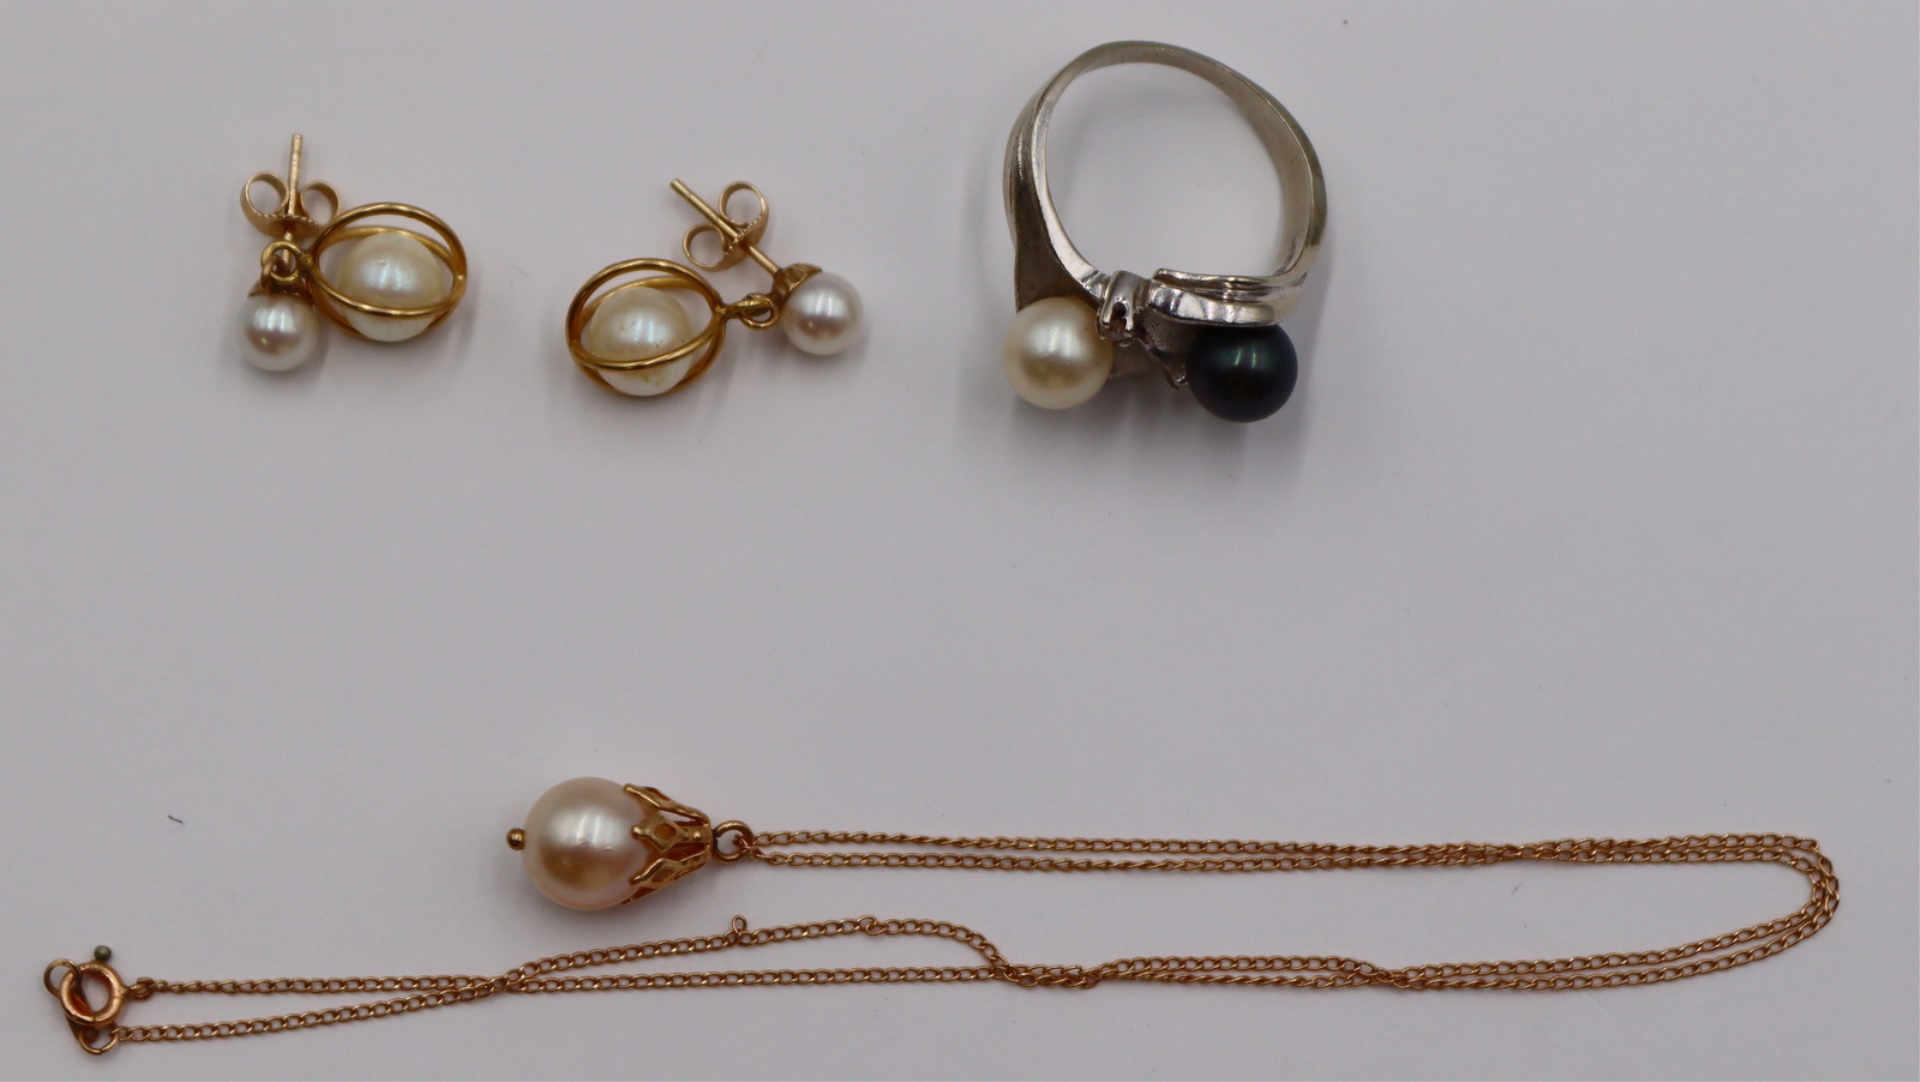 JEWELRY. ASSORTED 14KT GOLD PEARL